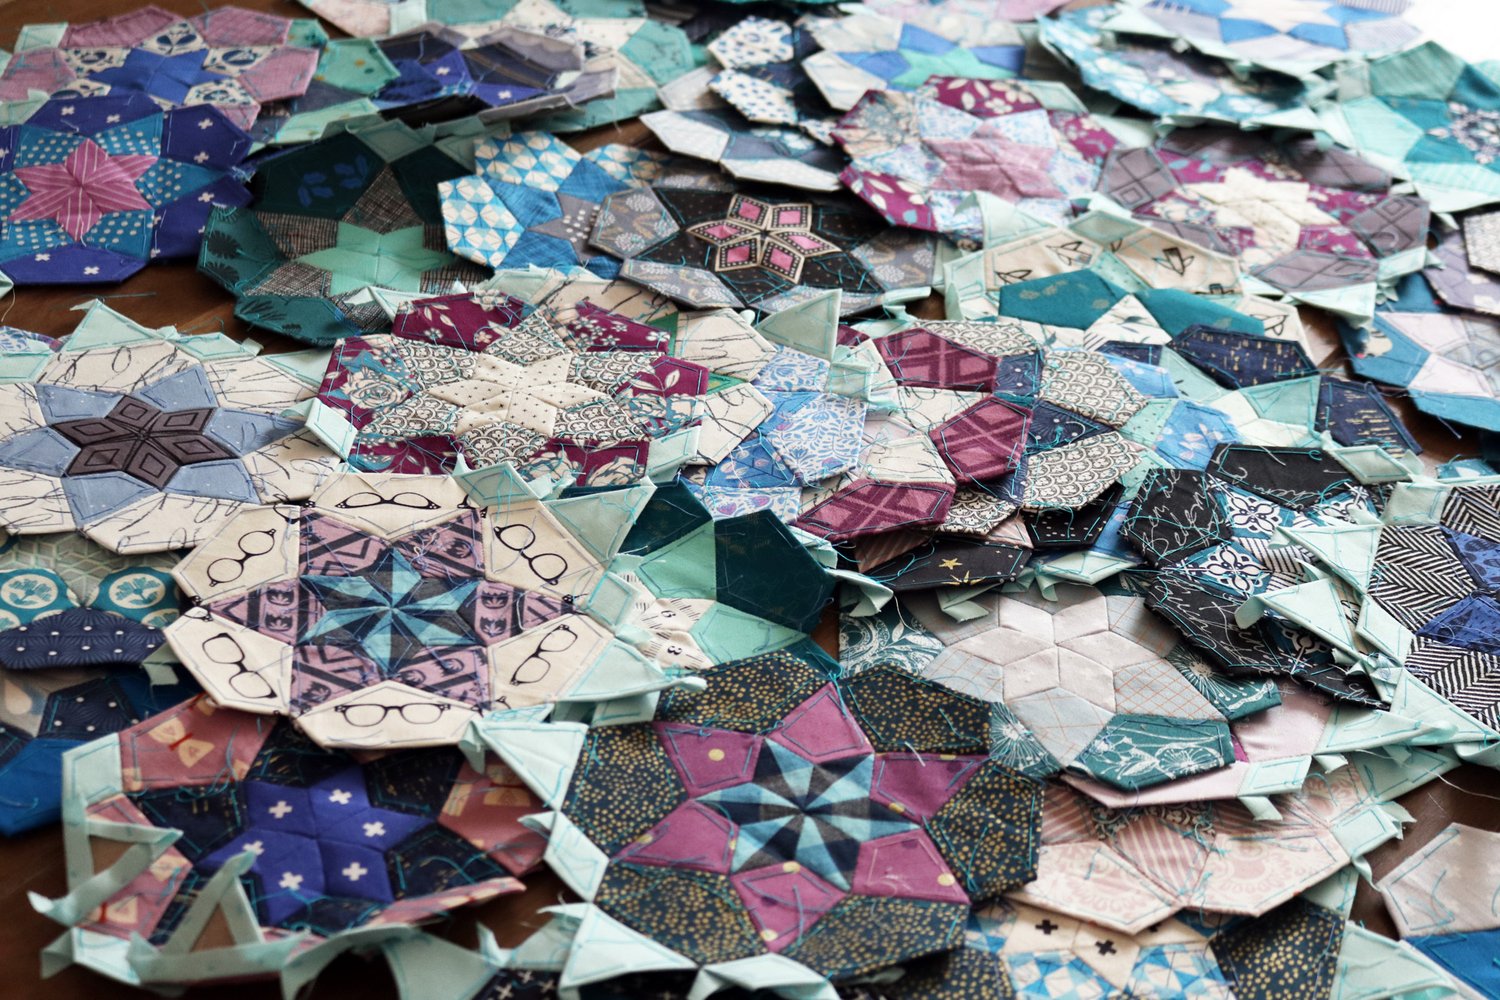 English paper piecing — Blog — Stitched in Color